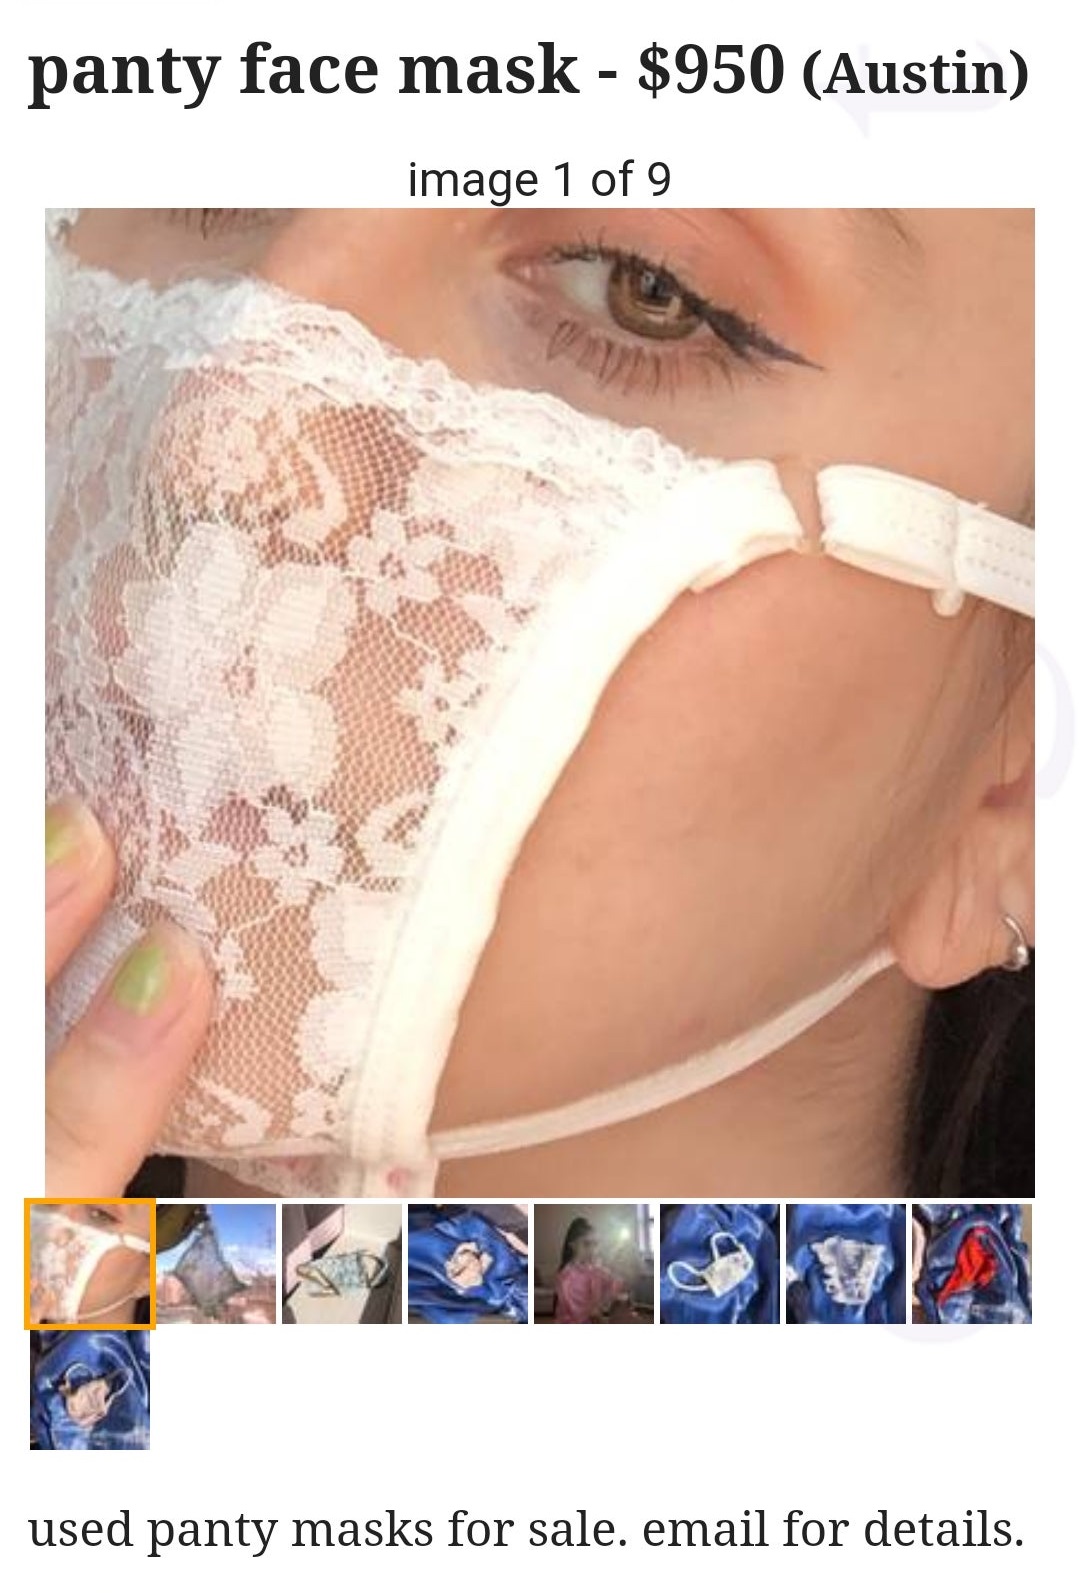 panties - panty face mask $950 Austin image 1 of 9 used panty masks for sale. email for details.